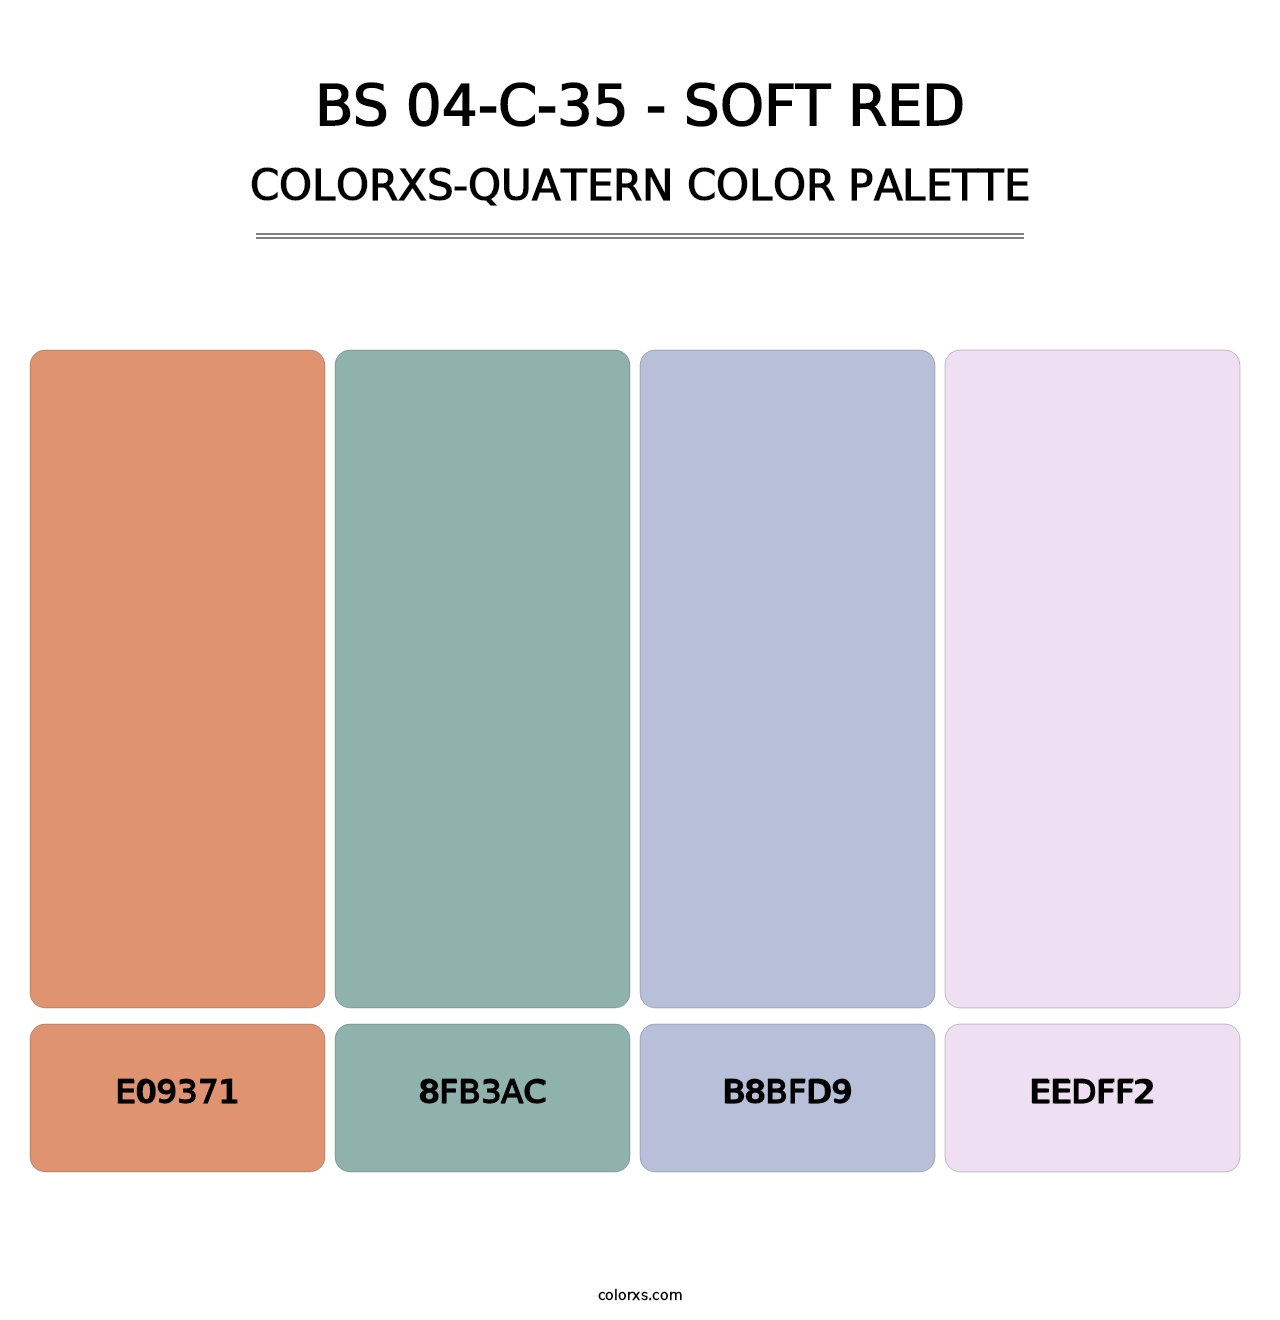 BS 04-C-35 - Soft Red - Colorxs Quatern Palette